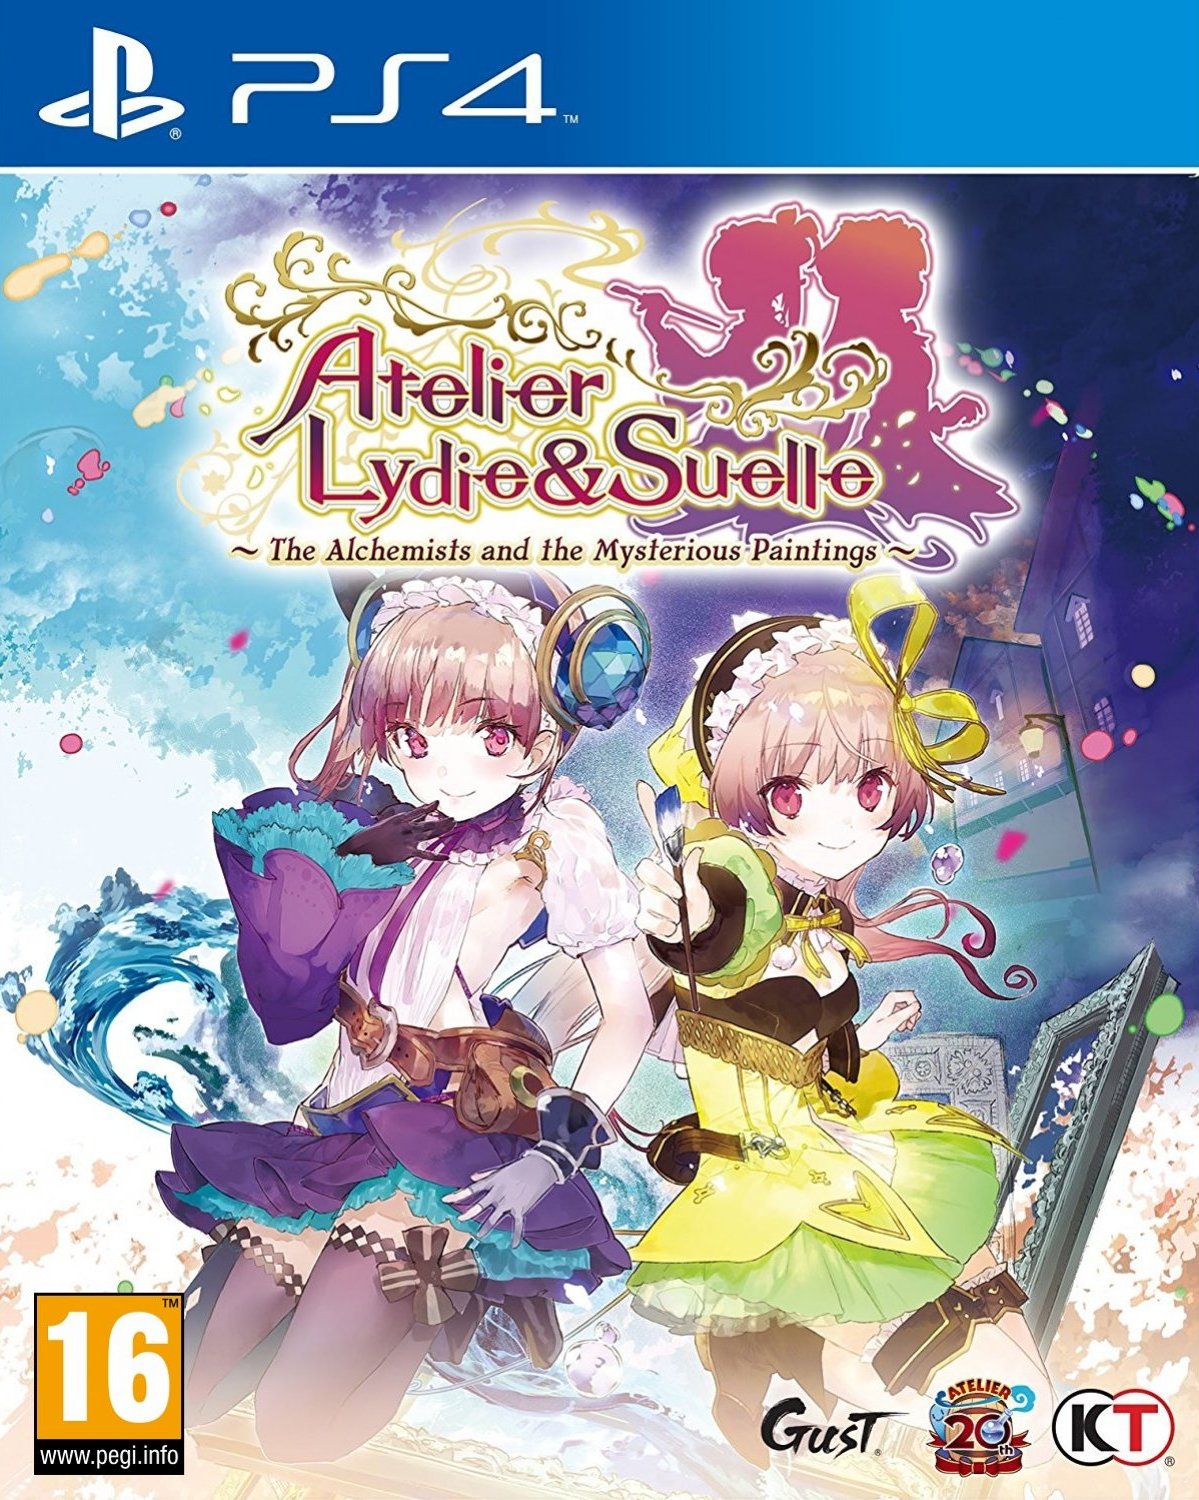 Atelier Lydie & Suelle: Alchemists of the Mysterious Painting